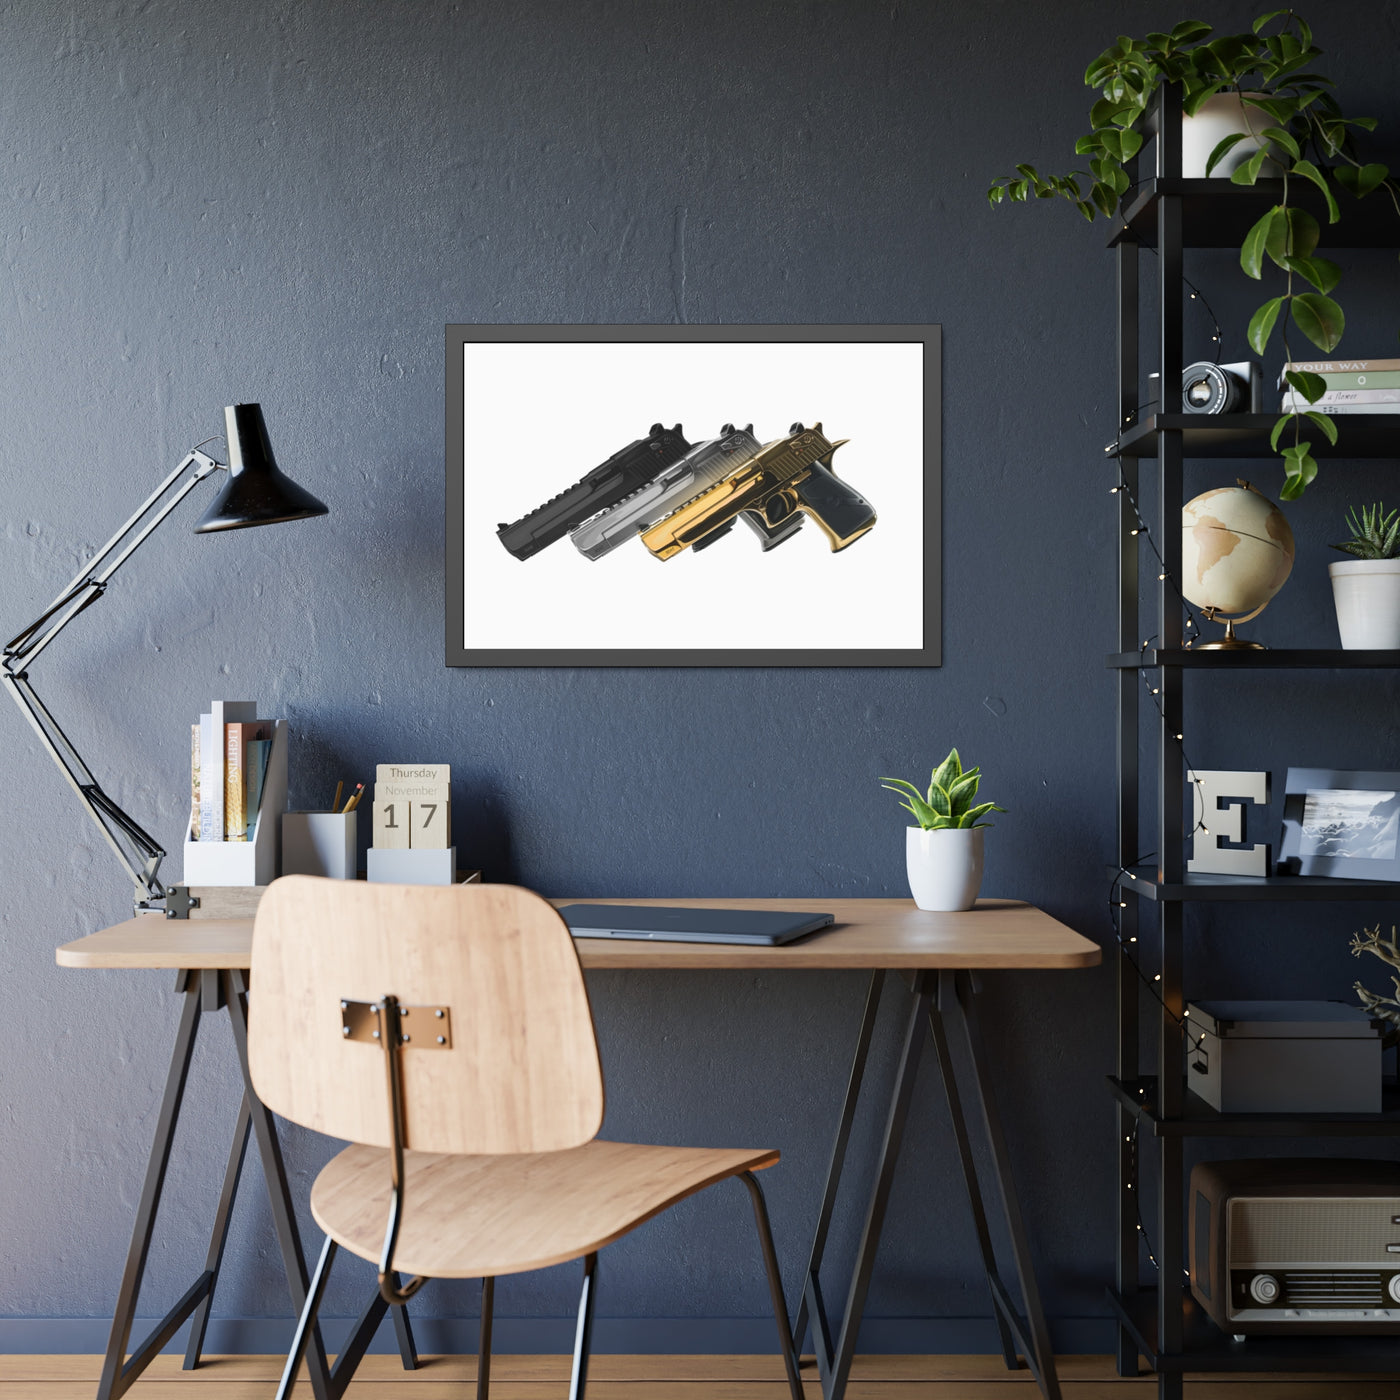 Super Power Pistol Trio - Just The Piece - Black Frame - Value Collection